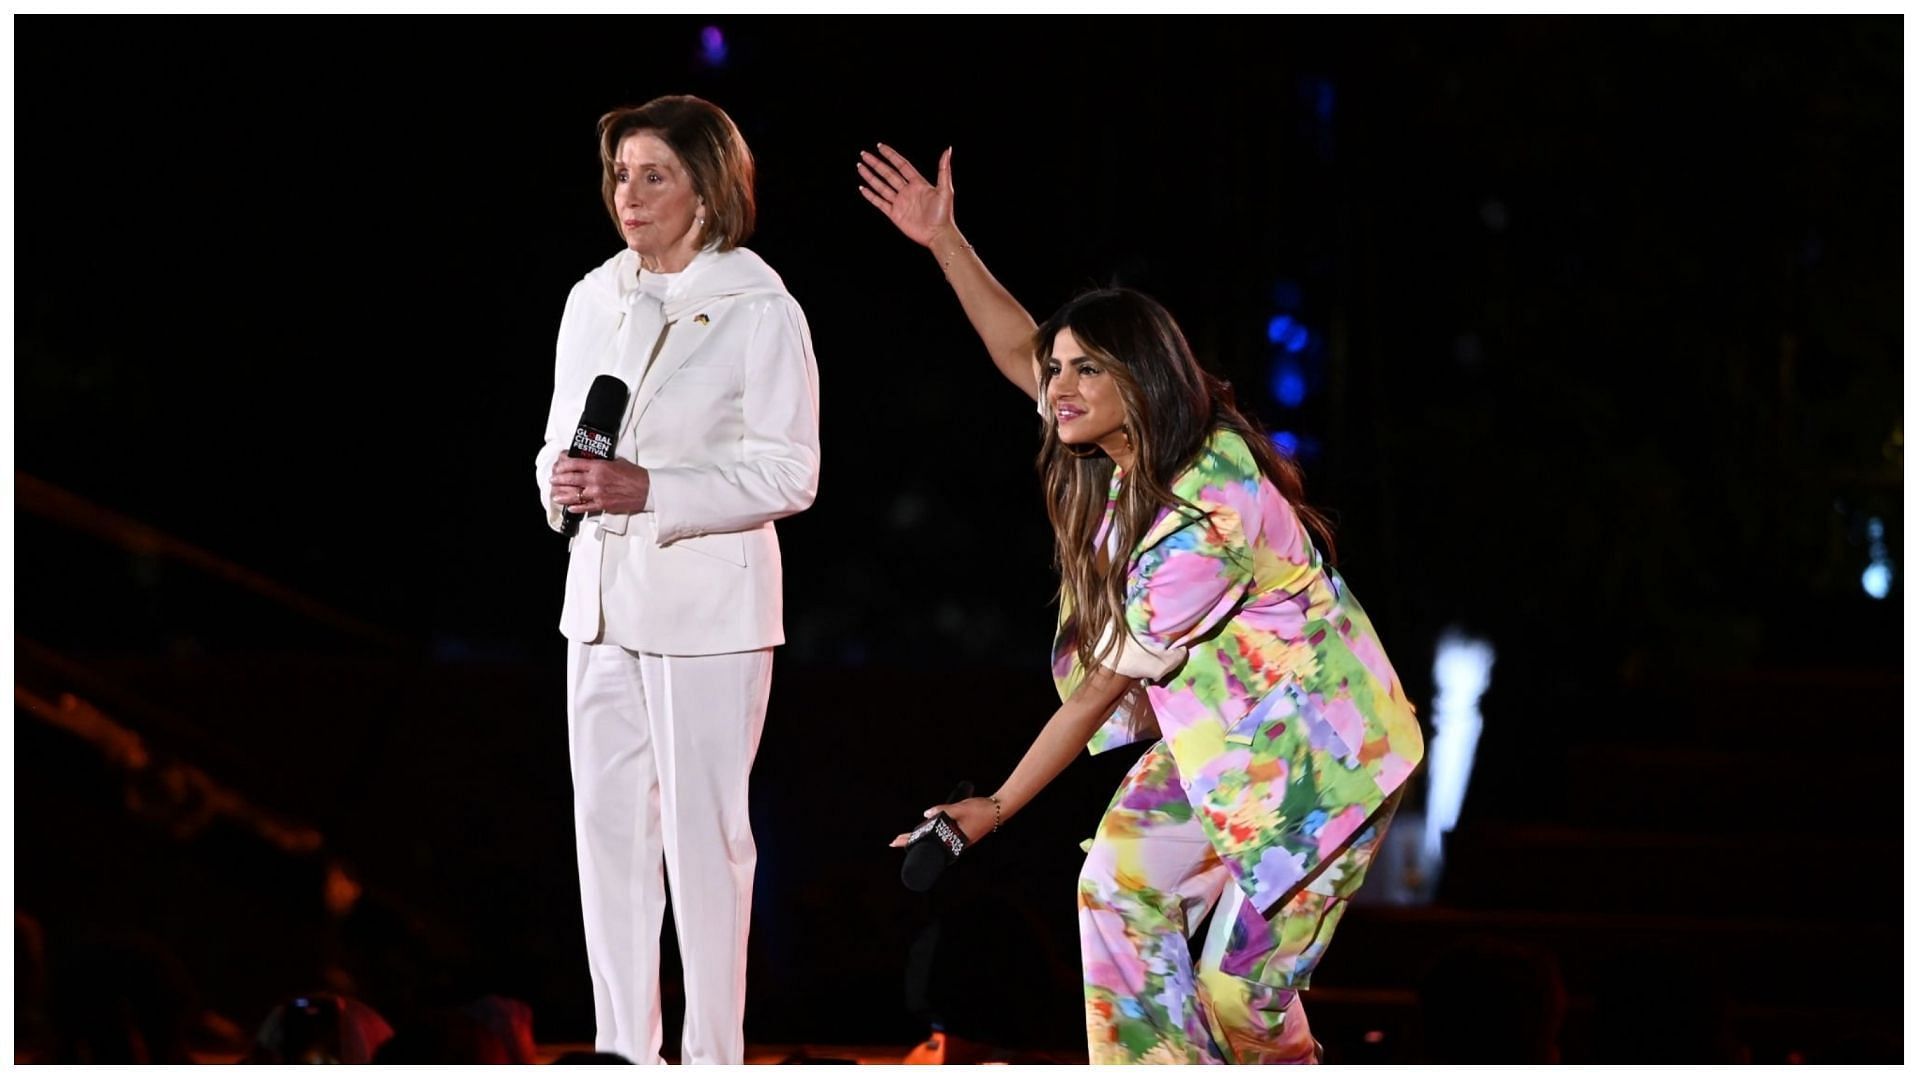 Nancy Pelosi was booed by the audience while she appeared at Global Citizen Music Festival (Image via Noam Galai/Getty Images)